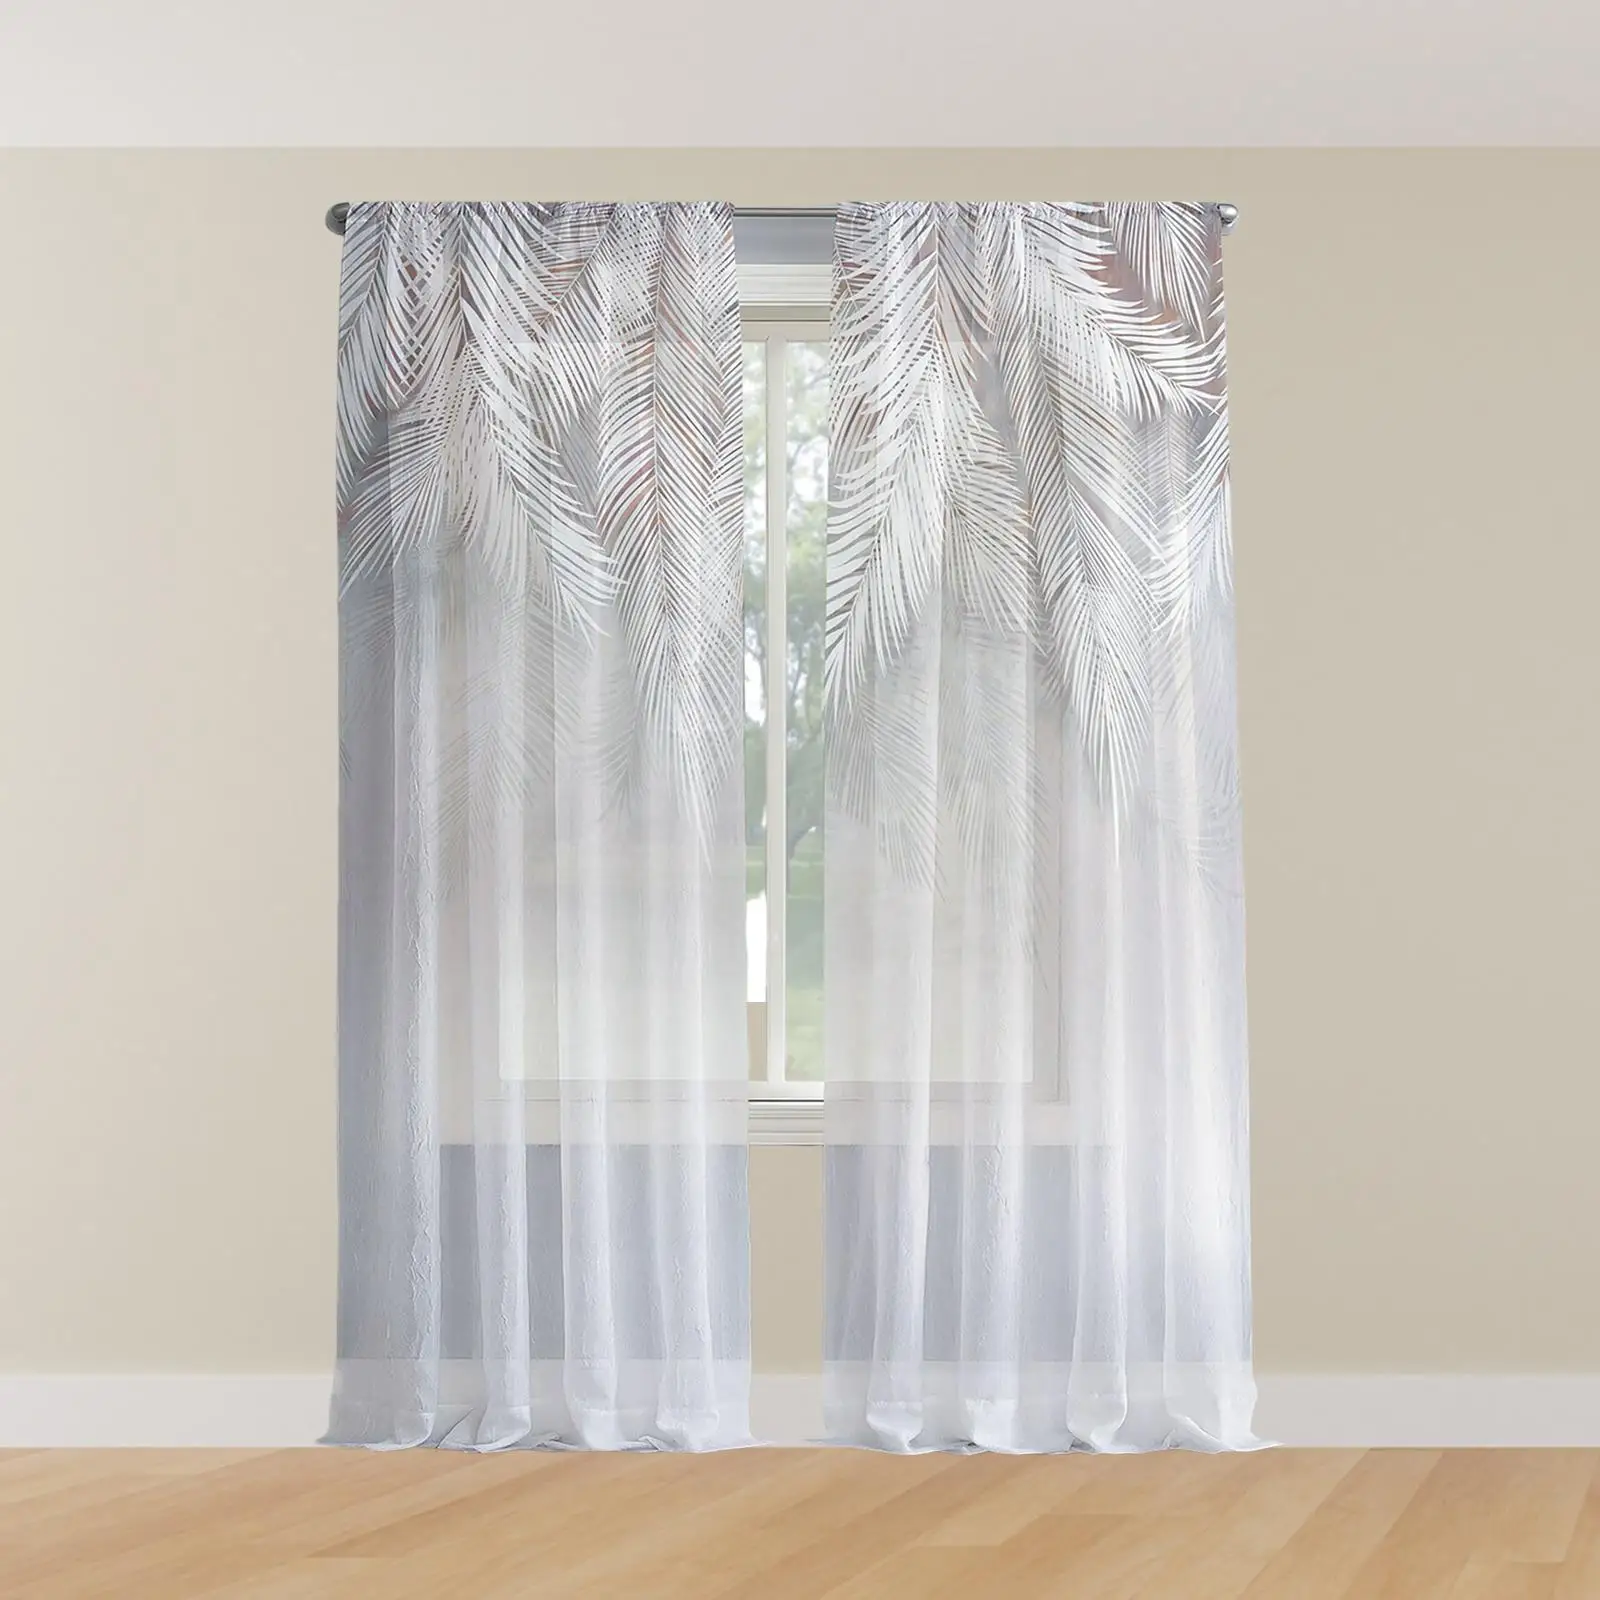 White Yarn Curtain Versatile Breathable Decor Semi Sheer Curtains Sheer Curtain for Dining Room Bedroom Living Room Kitchen